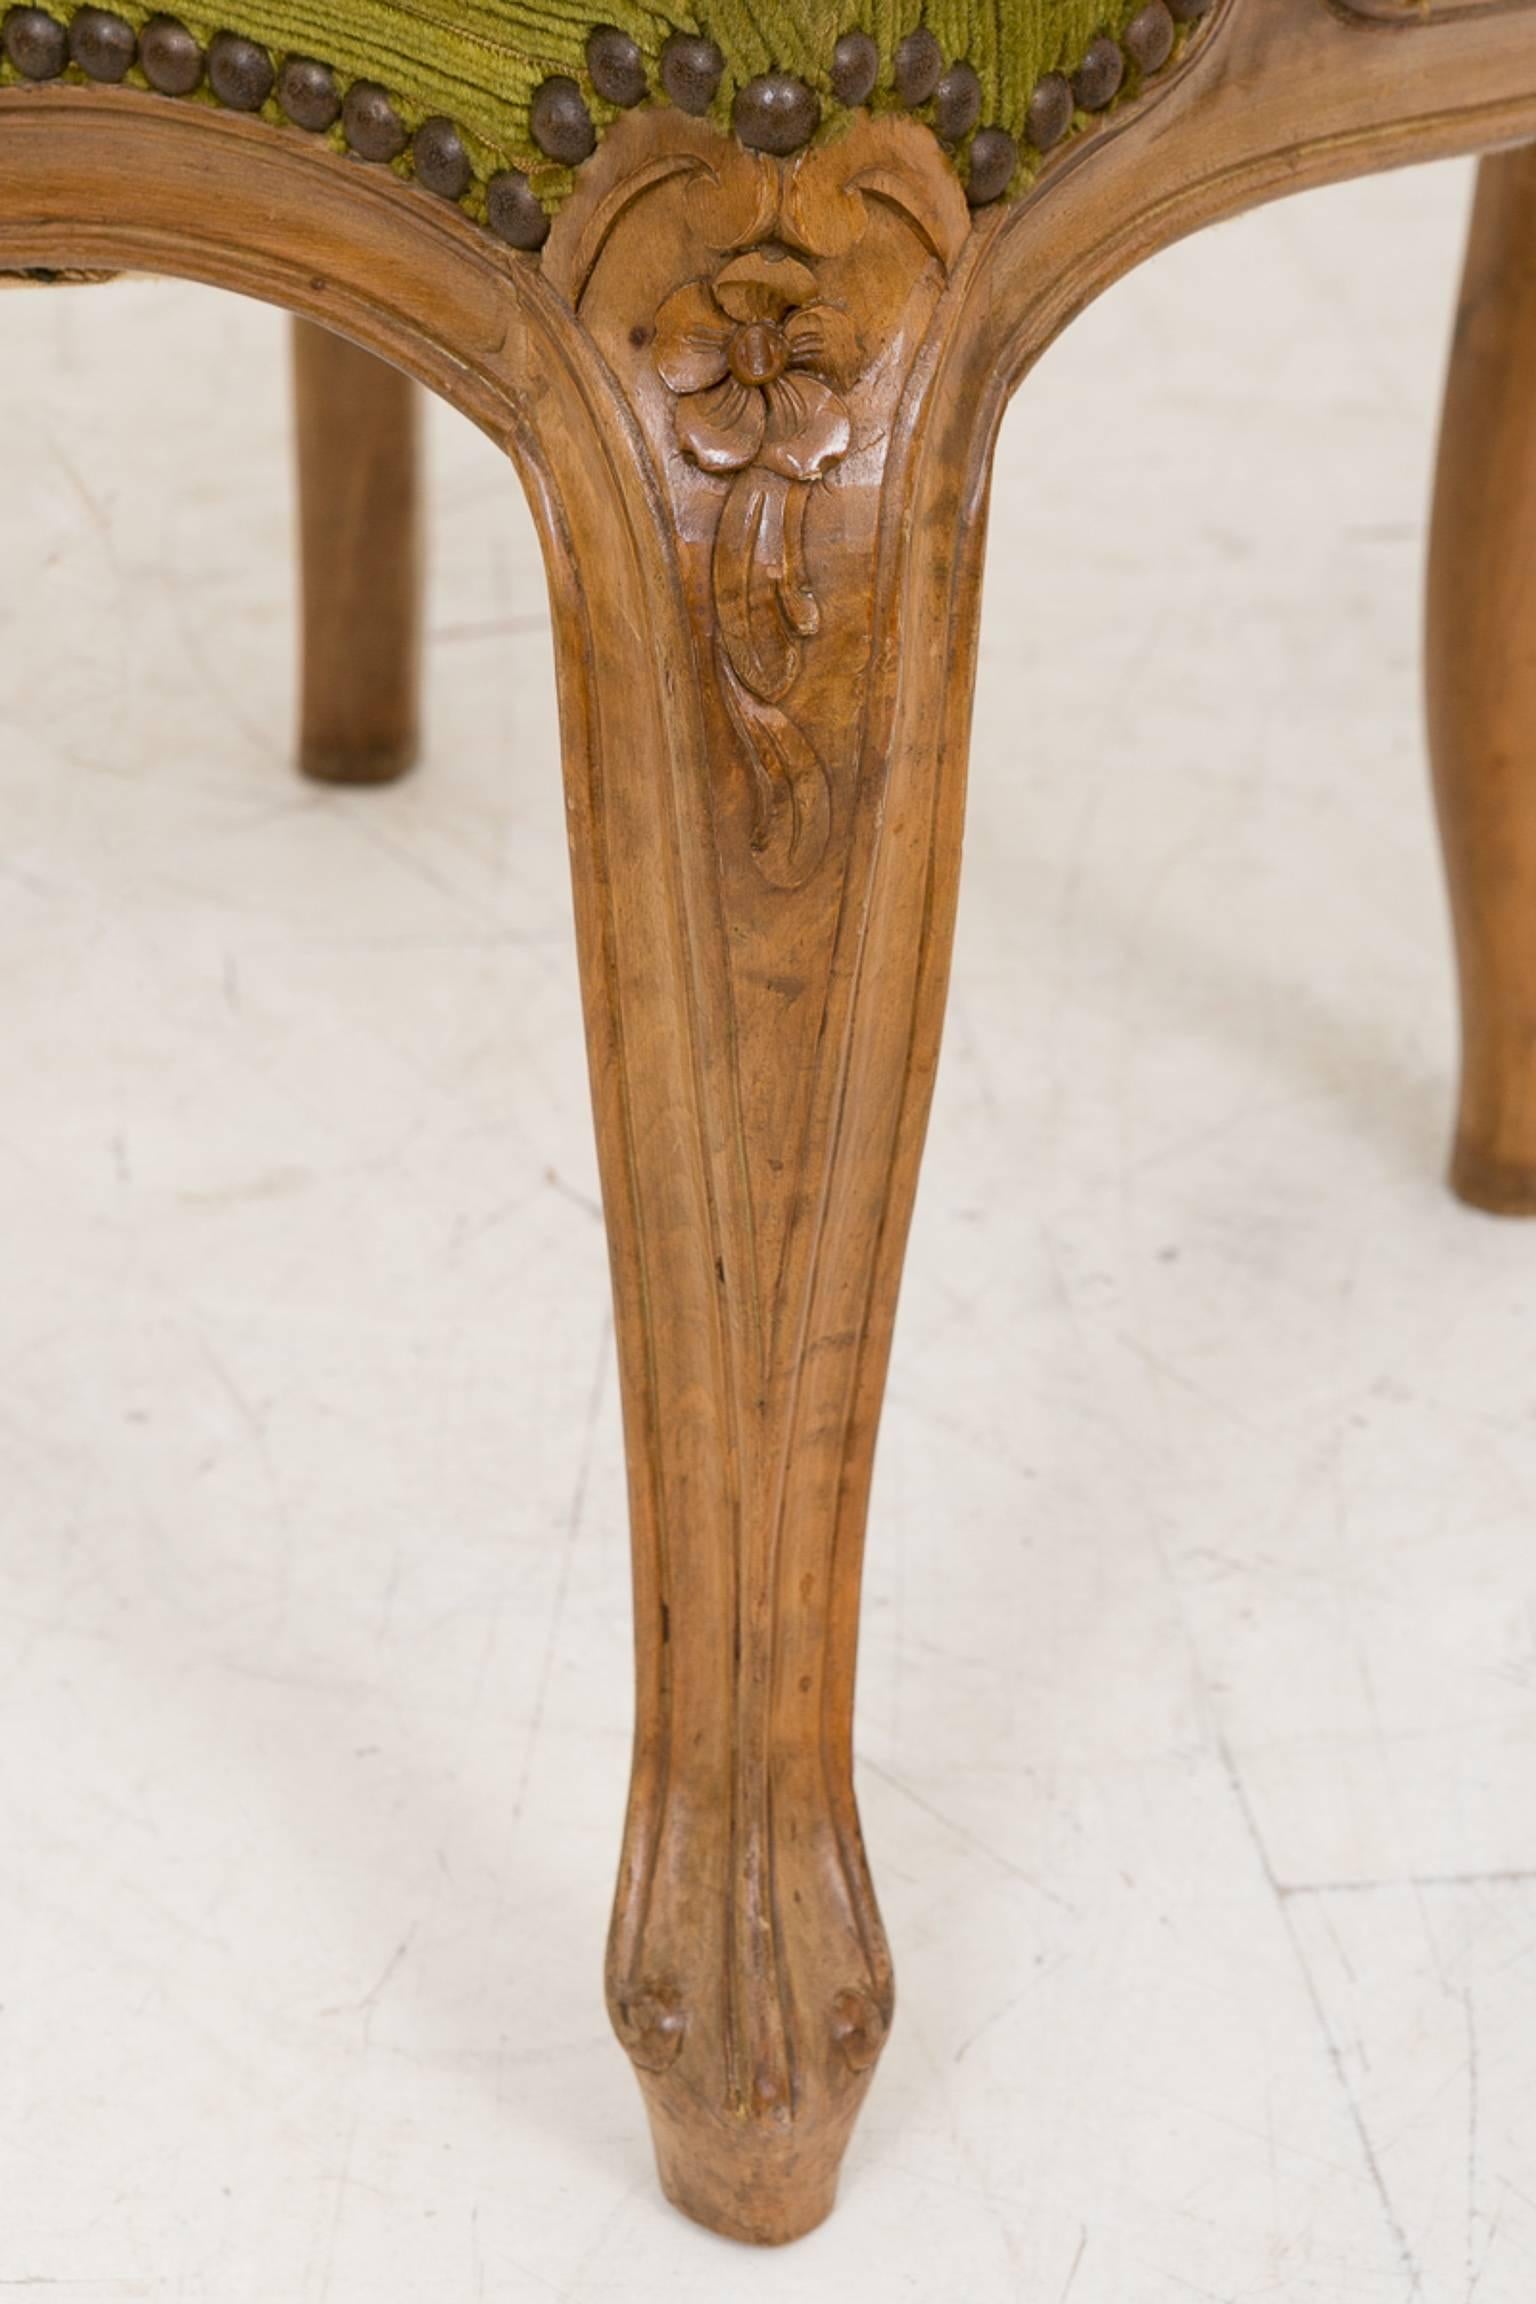 Pair of pretty French walnut open armchairs.
Standing on Cabriole legs with carved toes and carved knees.
We also have carving to the serpentine seat rail, swept arms and wood show back.

Size:
Height 34